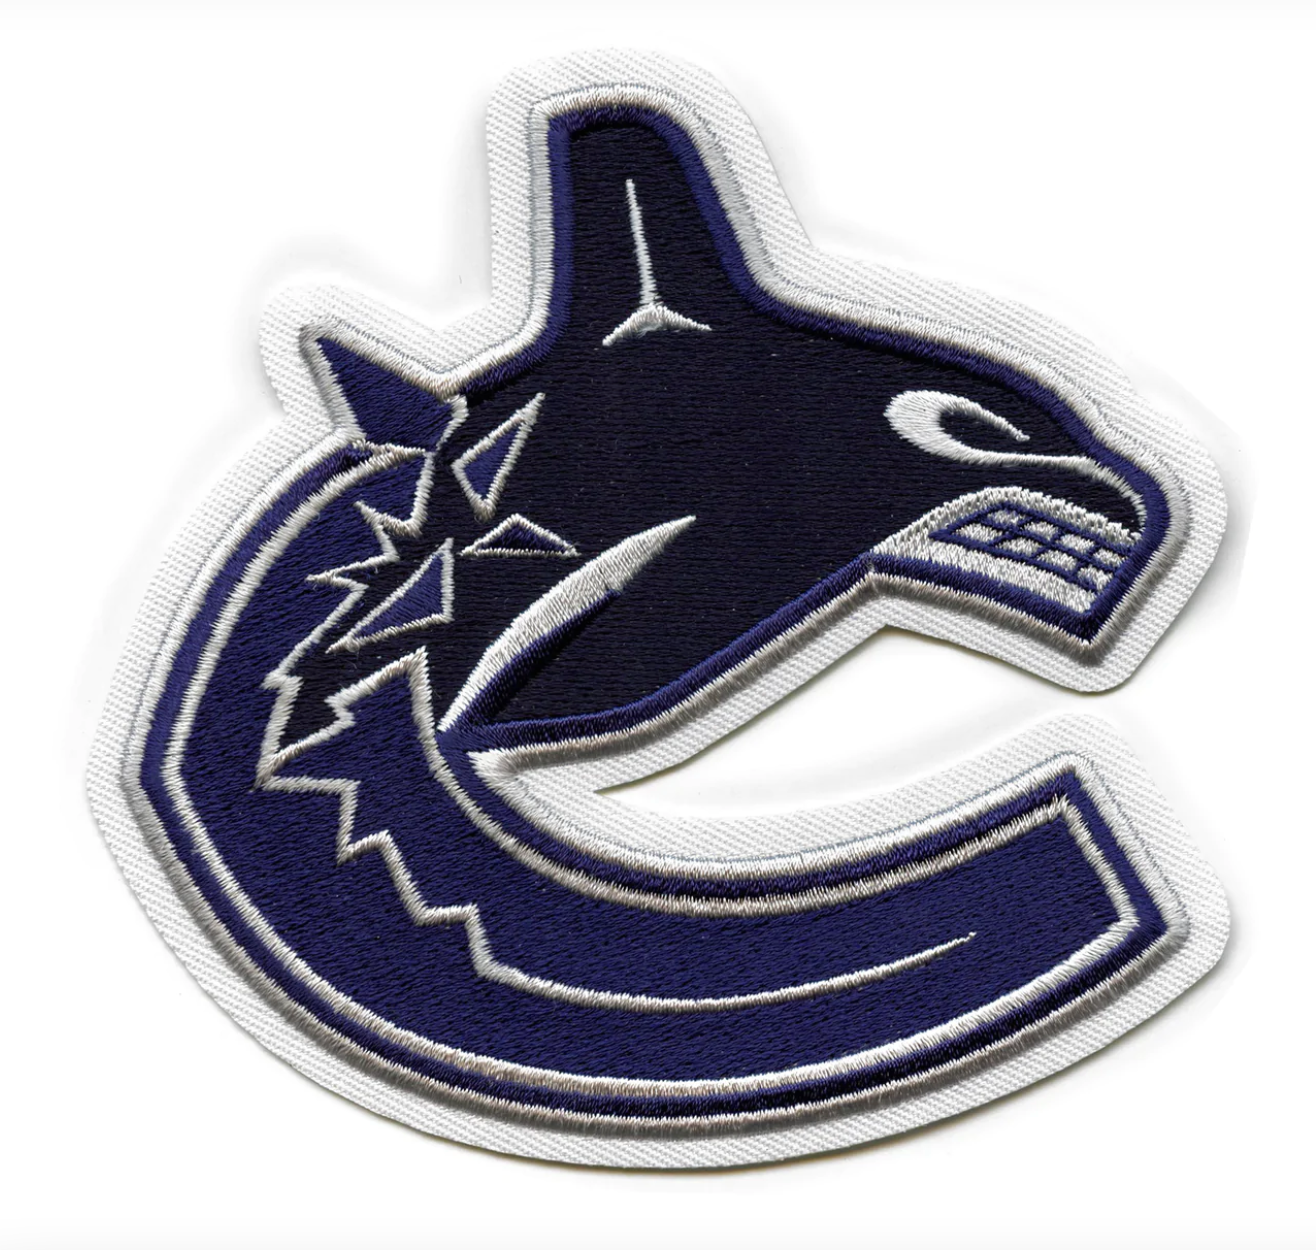 Vancouver Canucks Primary Logo Iron On 4.25" x 4.25" Patch